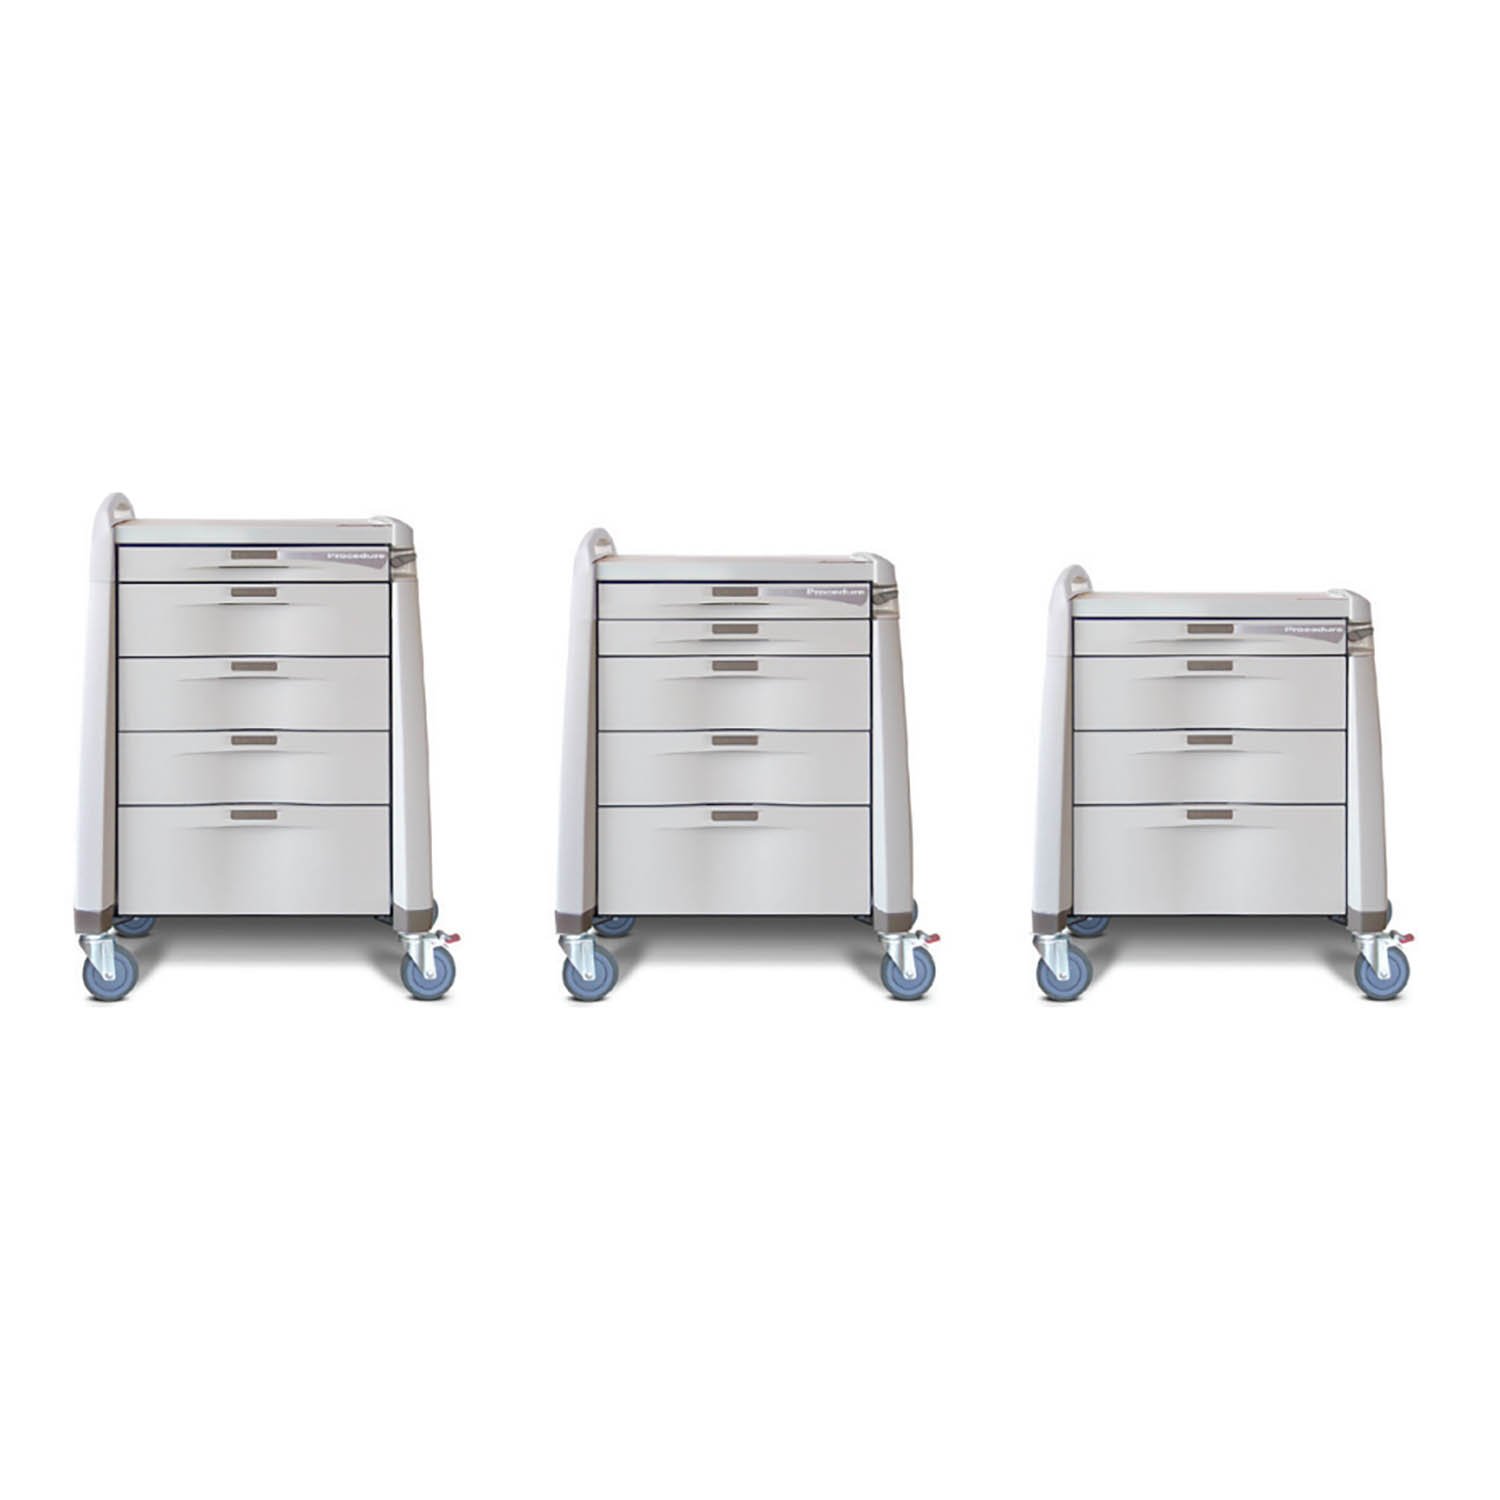 Avalo® Series Auto Packaging Medication Cart - Capsa Healthcare